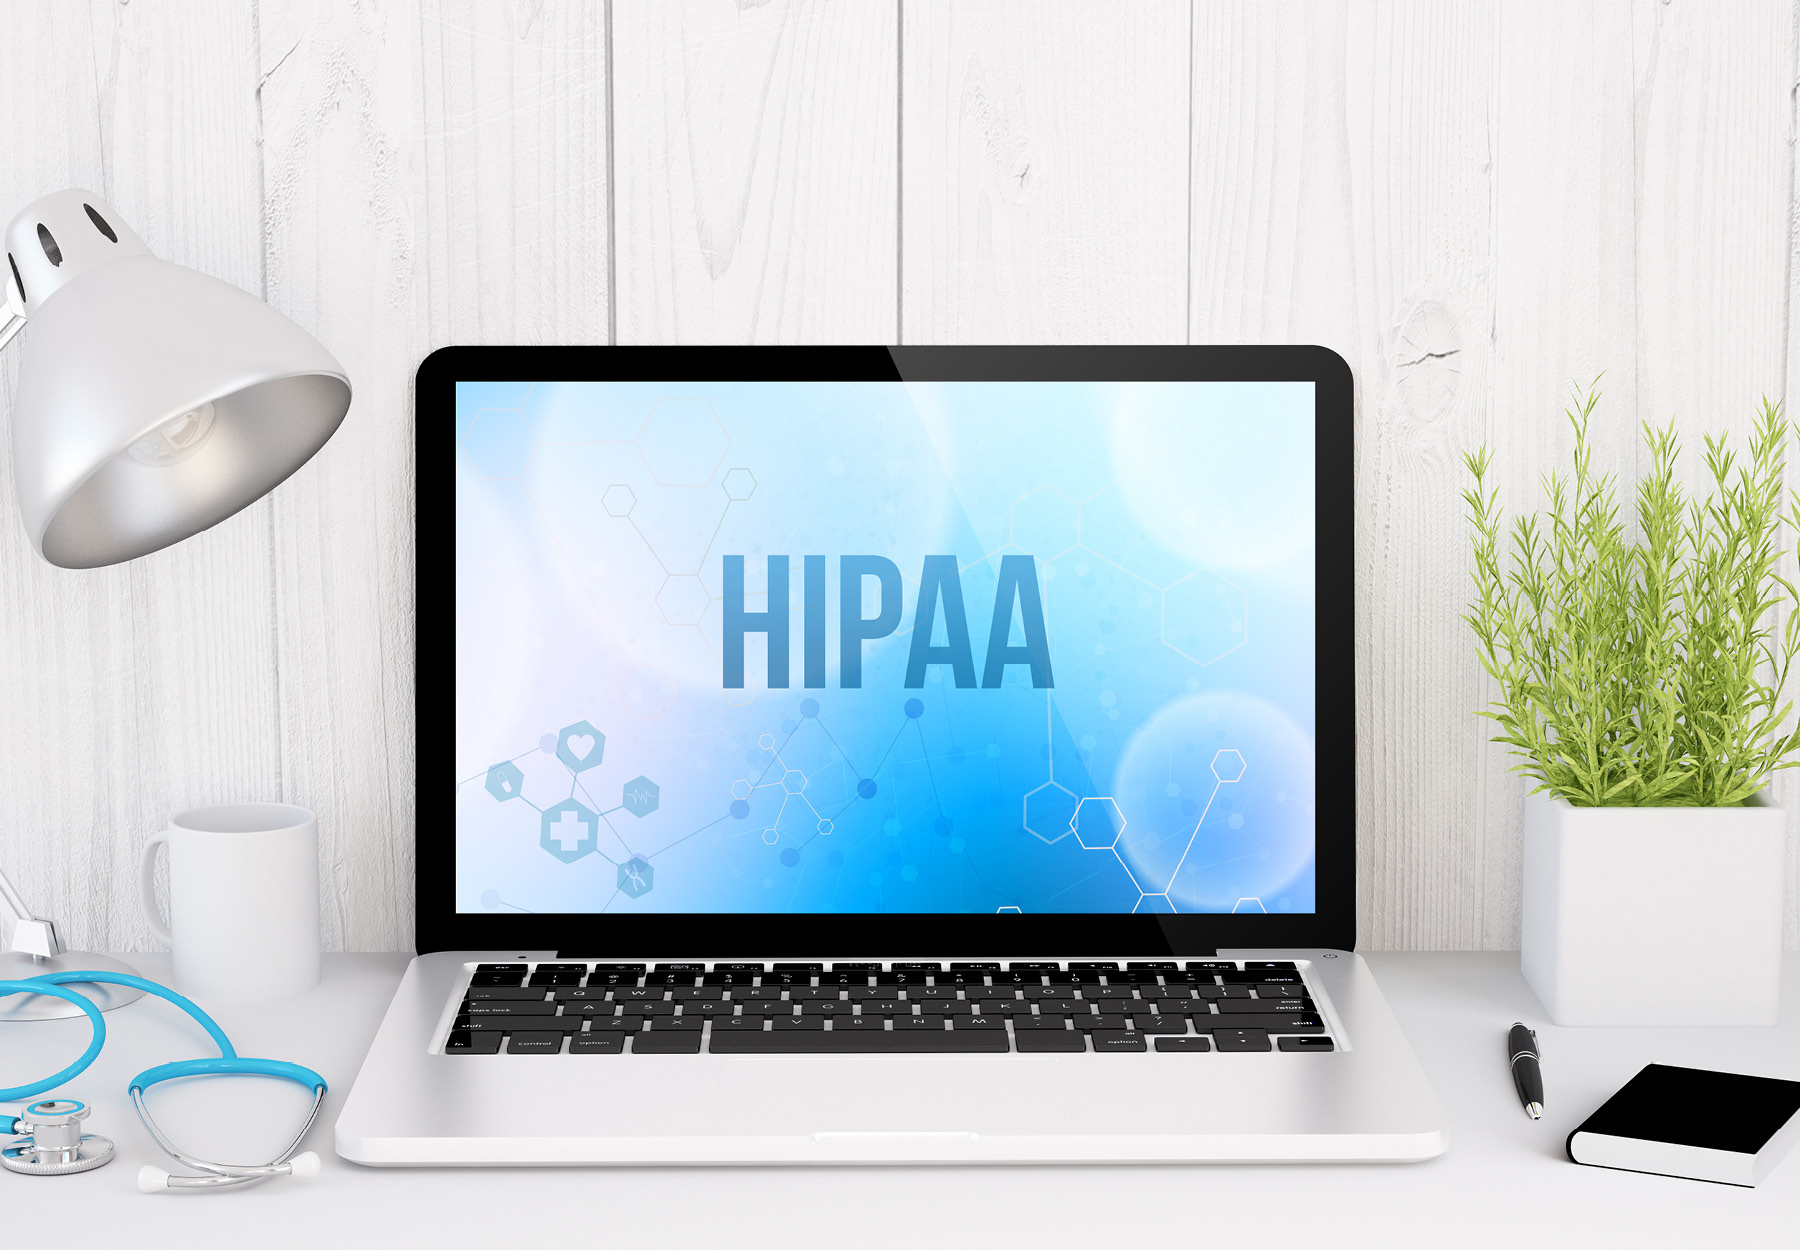 Florida Treatment Center Settles HIPAA Right of Access Enforcement Action for $160,000